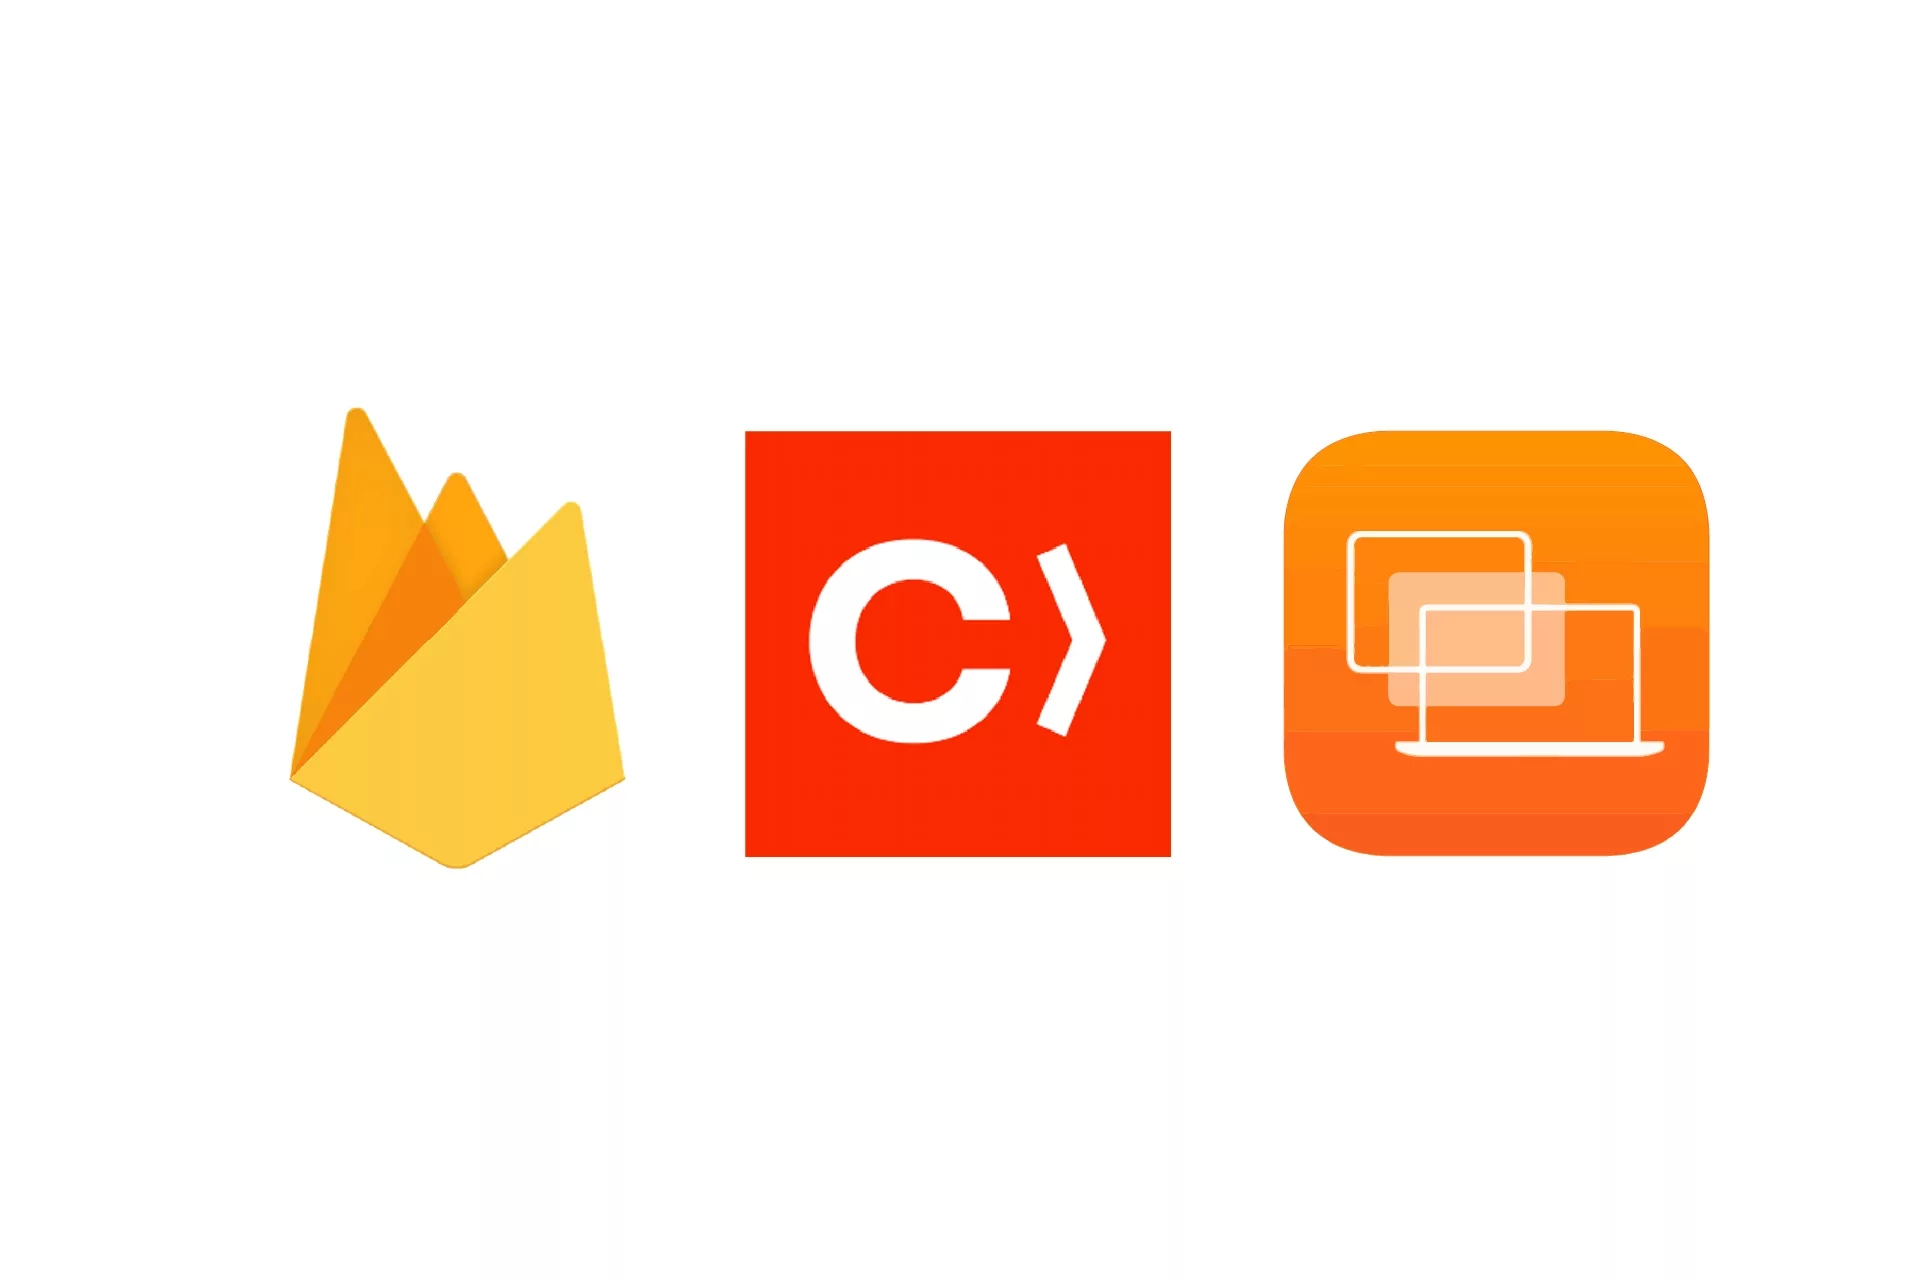 The Firebase, CocoaPods and Mac Catalyst Logos